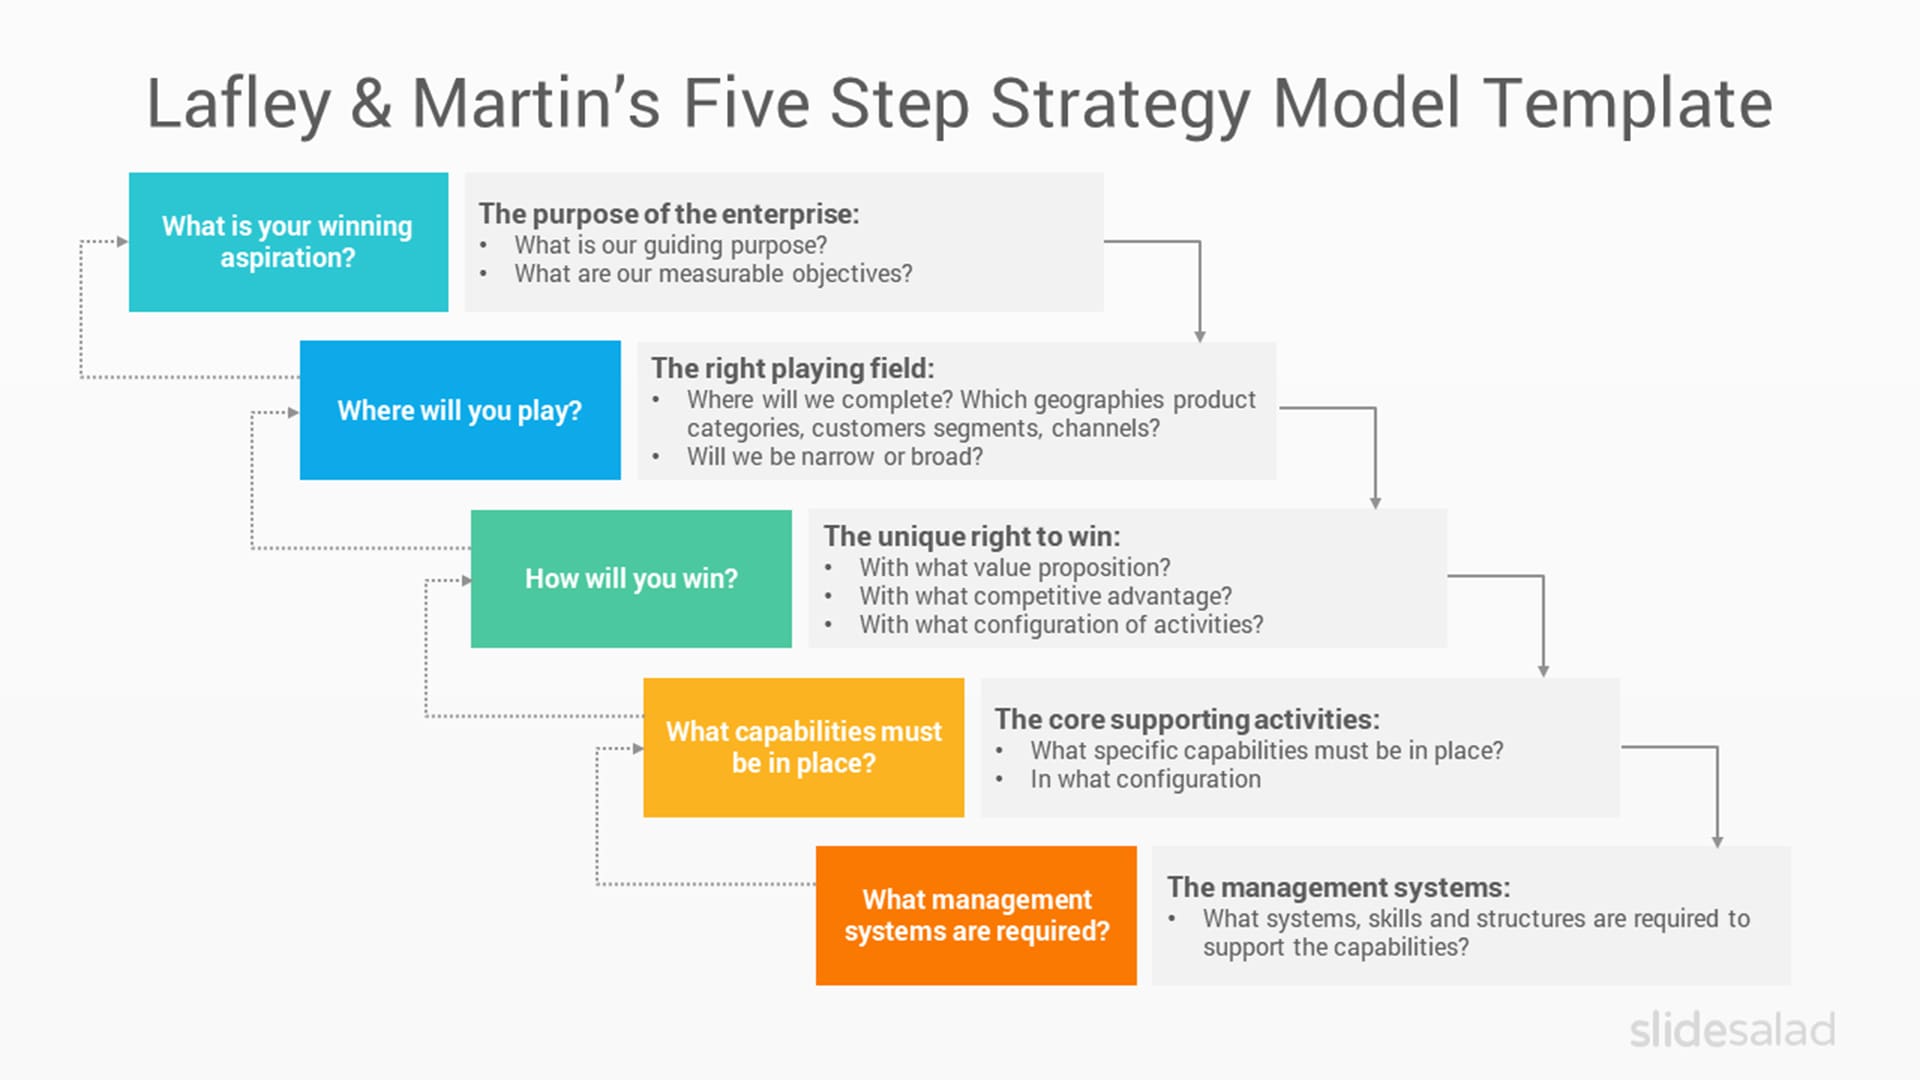 Lafley & Martin's Five-Step Strategy Model PowerPoint Template